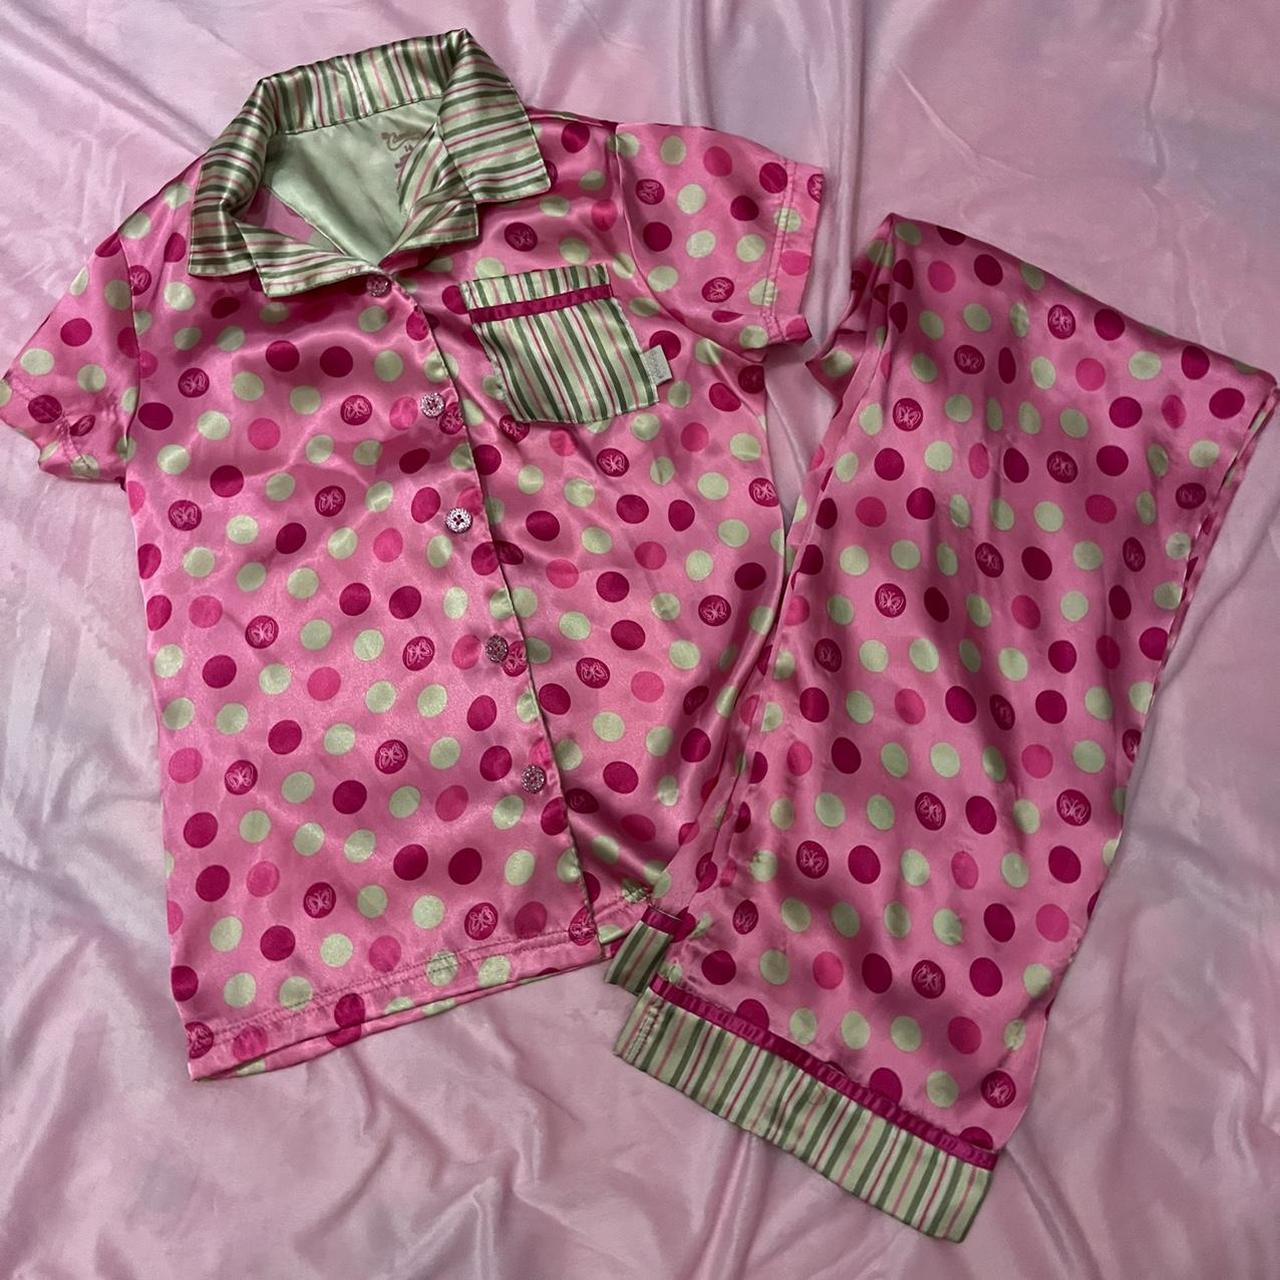 Satin dotted pajamas by candies - Depop